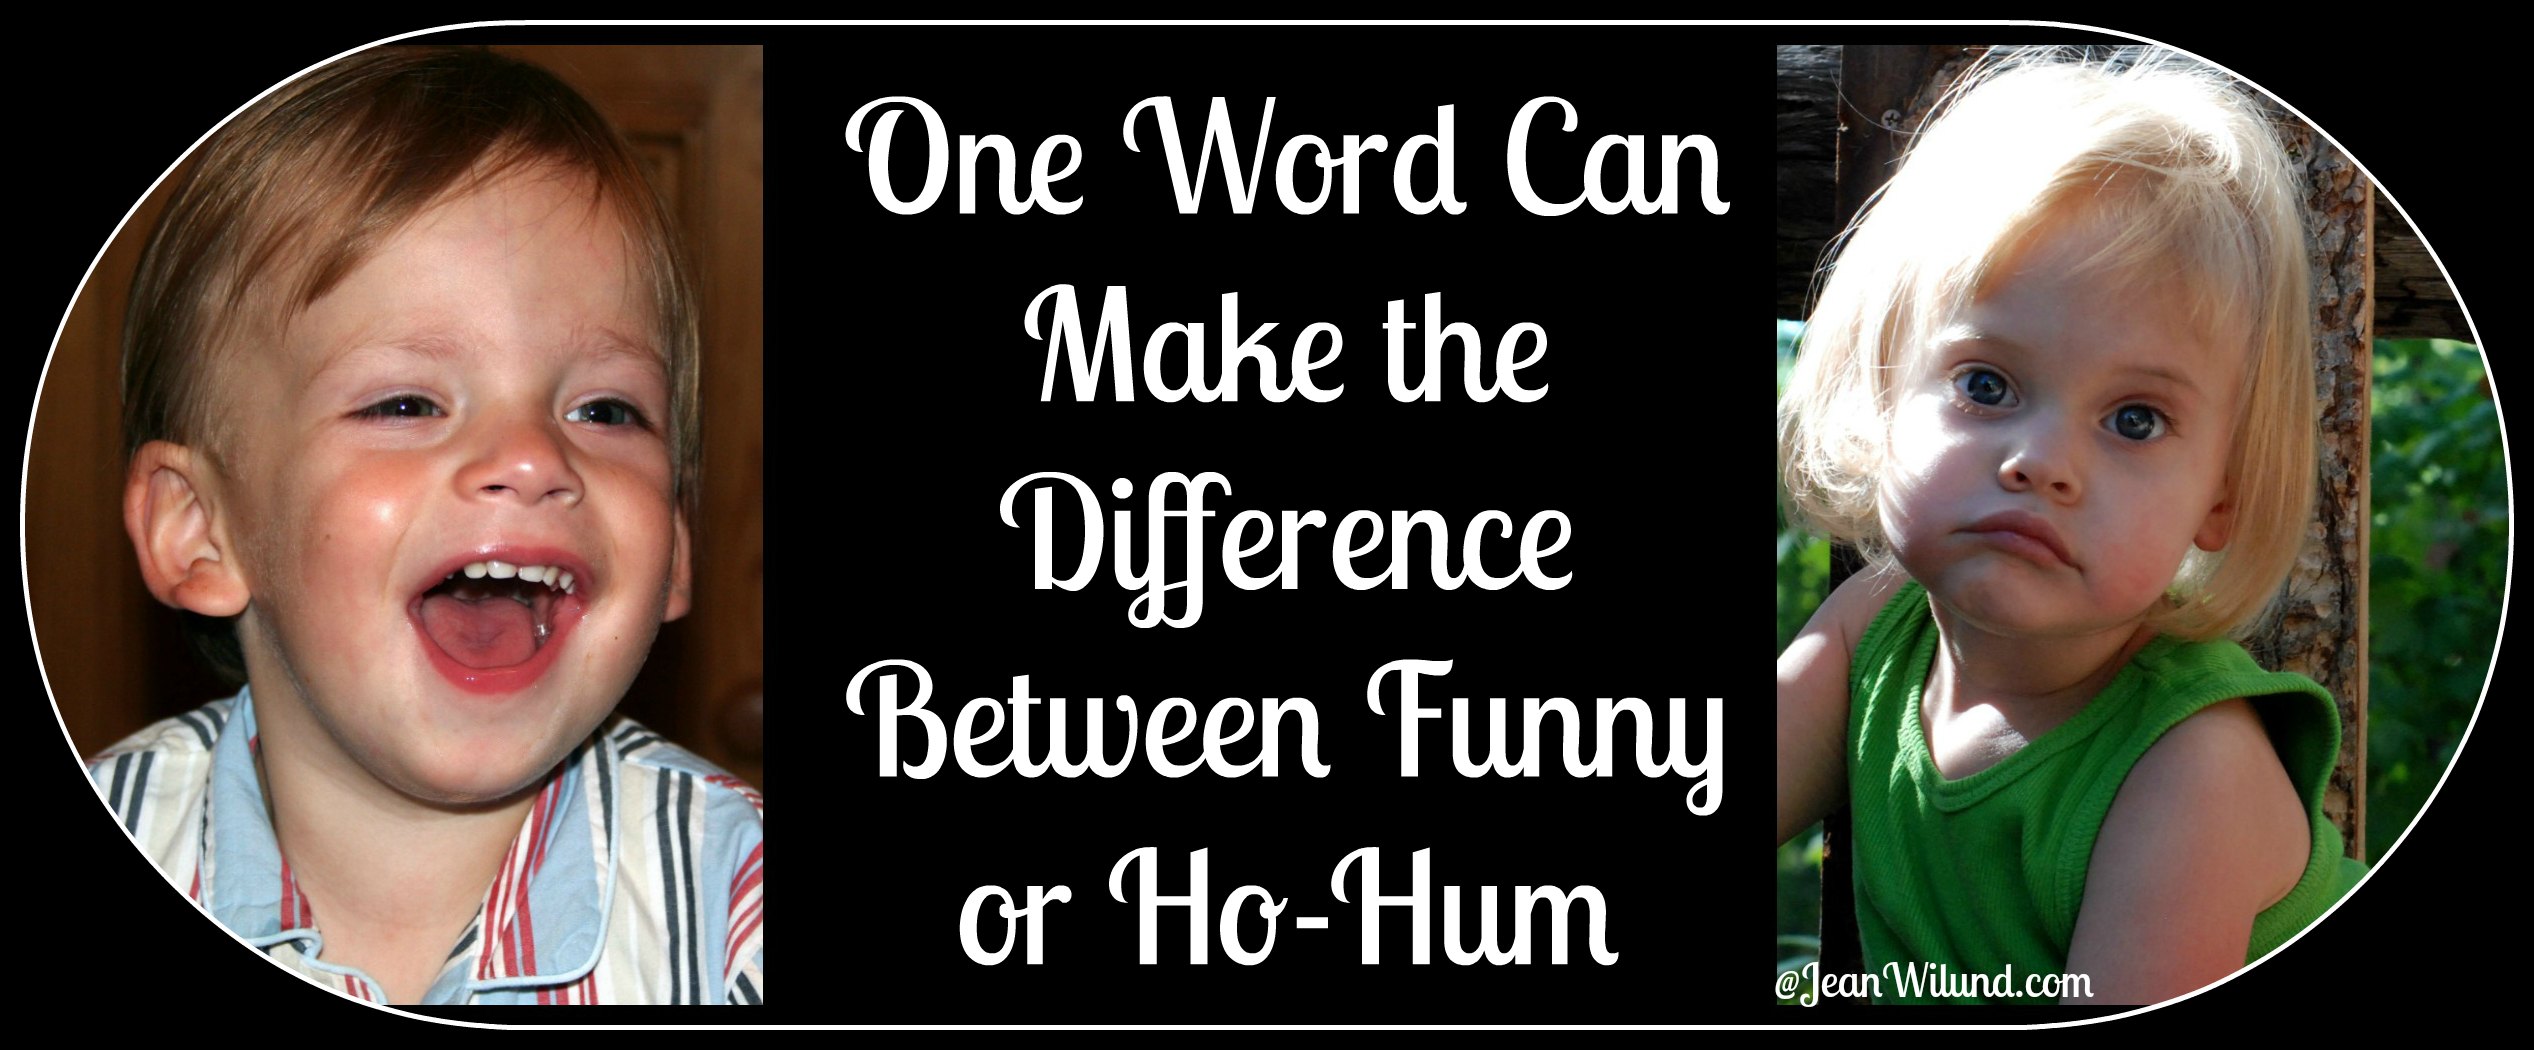 One Word Can Make the Difference Between Funny or Ho Hum. Click to read Three Tips to Help.